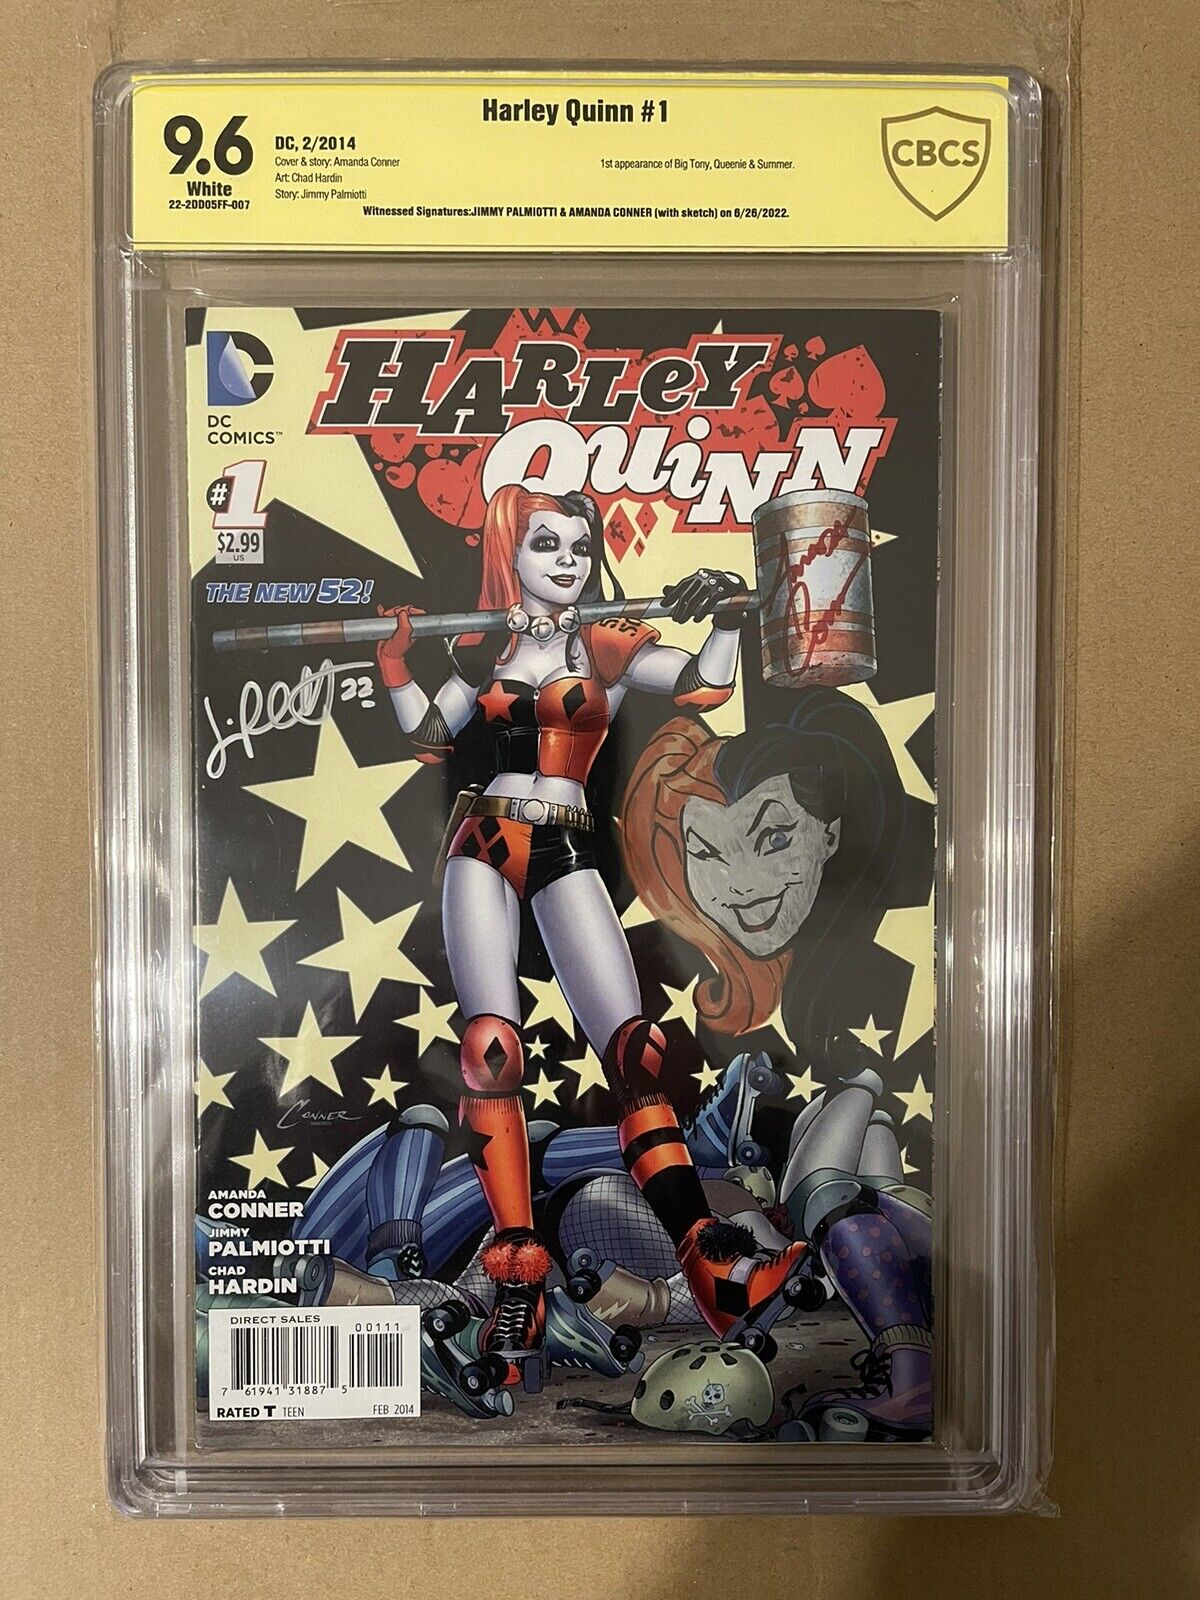 Harley Quinn #1 CBCS 9.6 Signed By Amanda Conner with Sketch and Jimmy Palmiotti